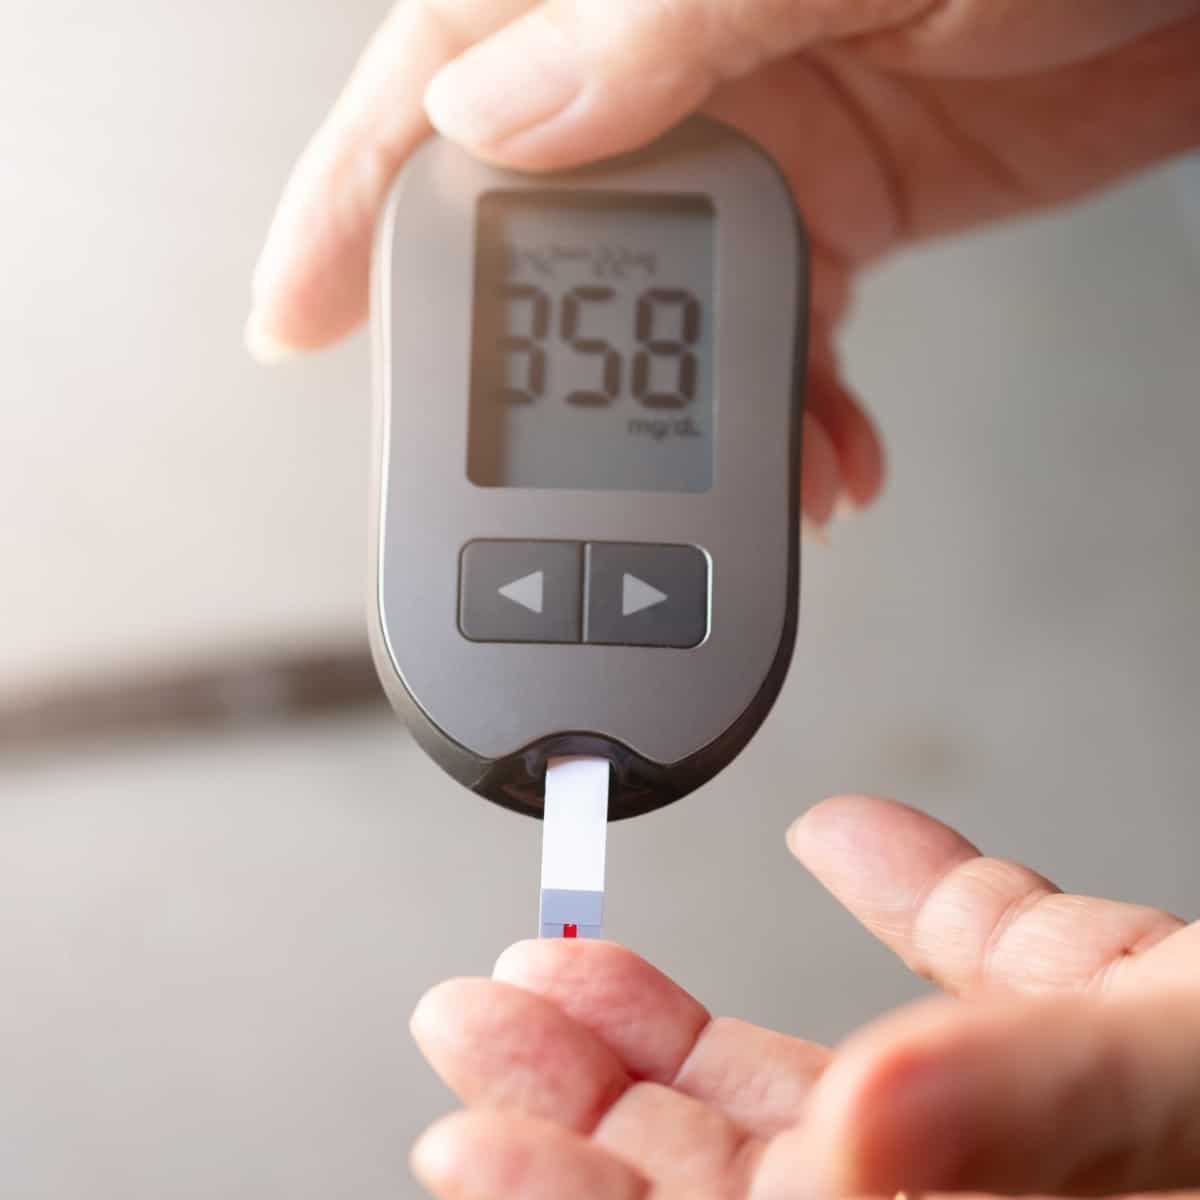 What Levels of Blood Sugar Are Dangerous? - Diabetes Strong